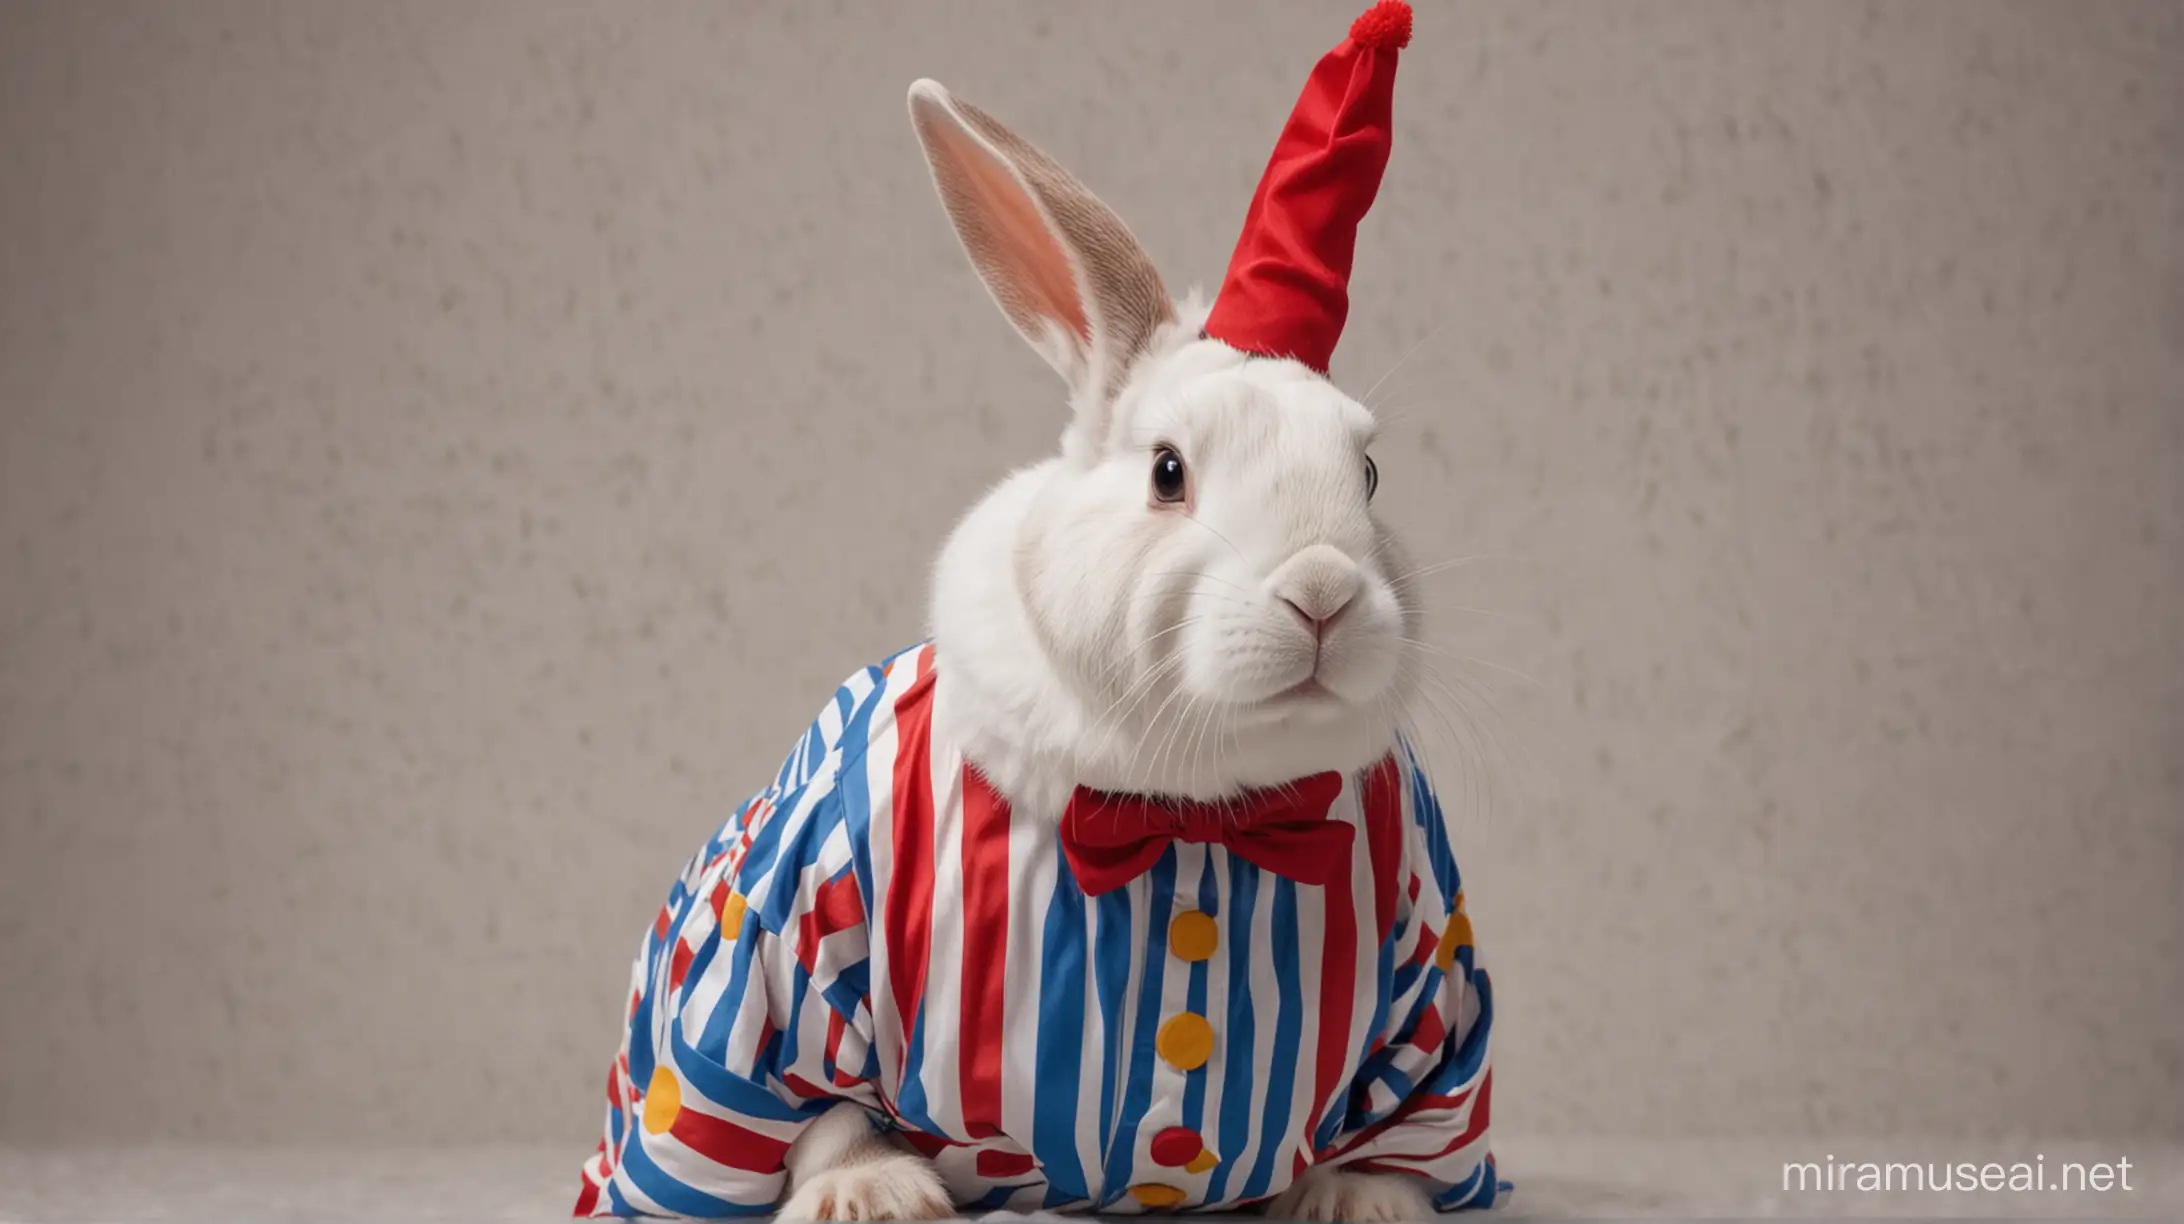 youtube thumbnail of a rabbit in a clown suit